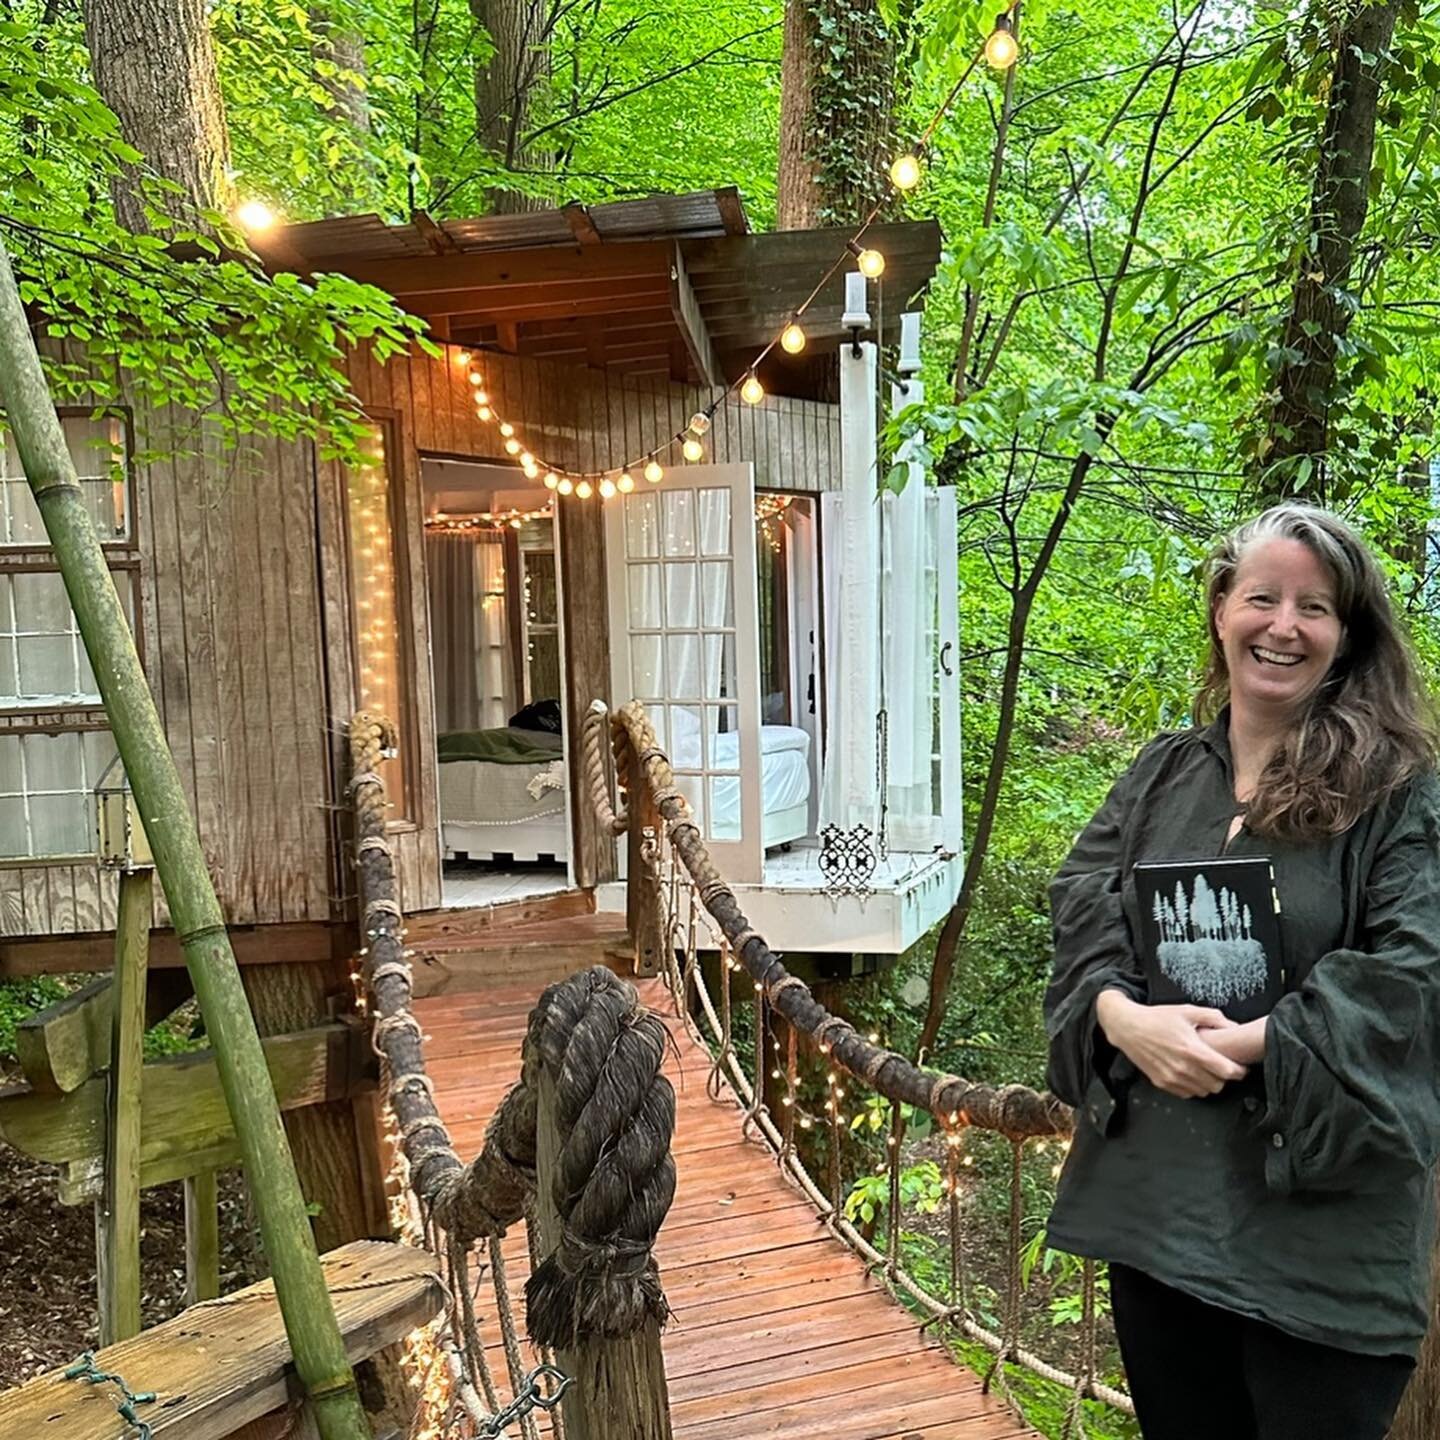 Hello trees! After a special book party last night, now I&rsquo;m living in a gorgeous tree house for a few days. 💚

Last night was wonderful. Swipe to see some pics. 🥳

Thank you to Laura Hunt and everyone who joined us in Manuel&rsquo;s Tavern to